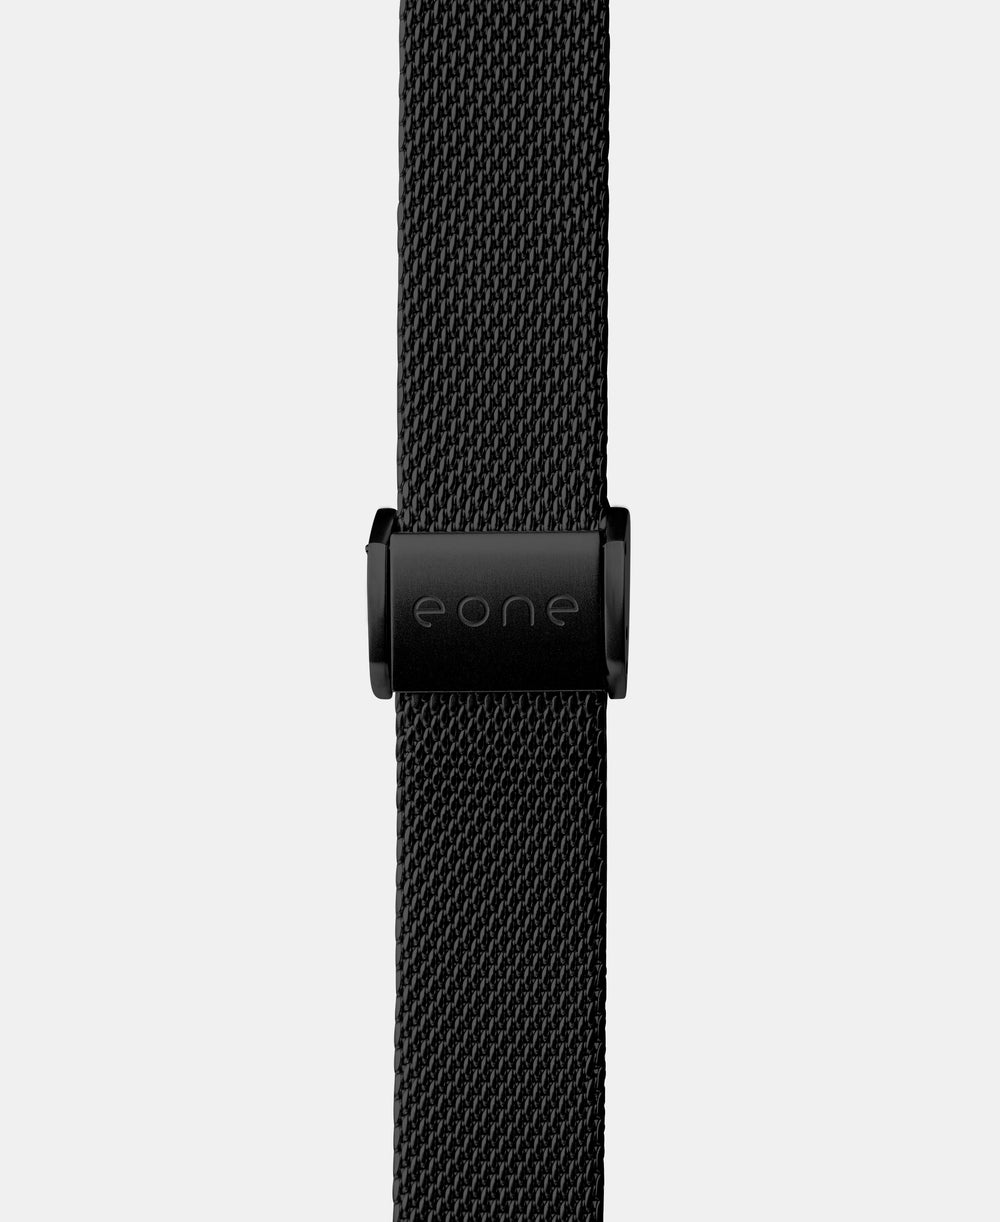 A photo shows the strap lying on a flat surface. One part has a fixed clasp and the other part has an adjustable clasp for a custom fit.